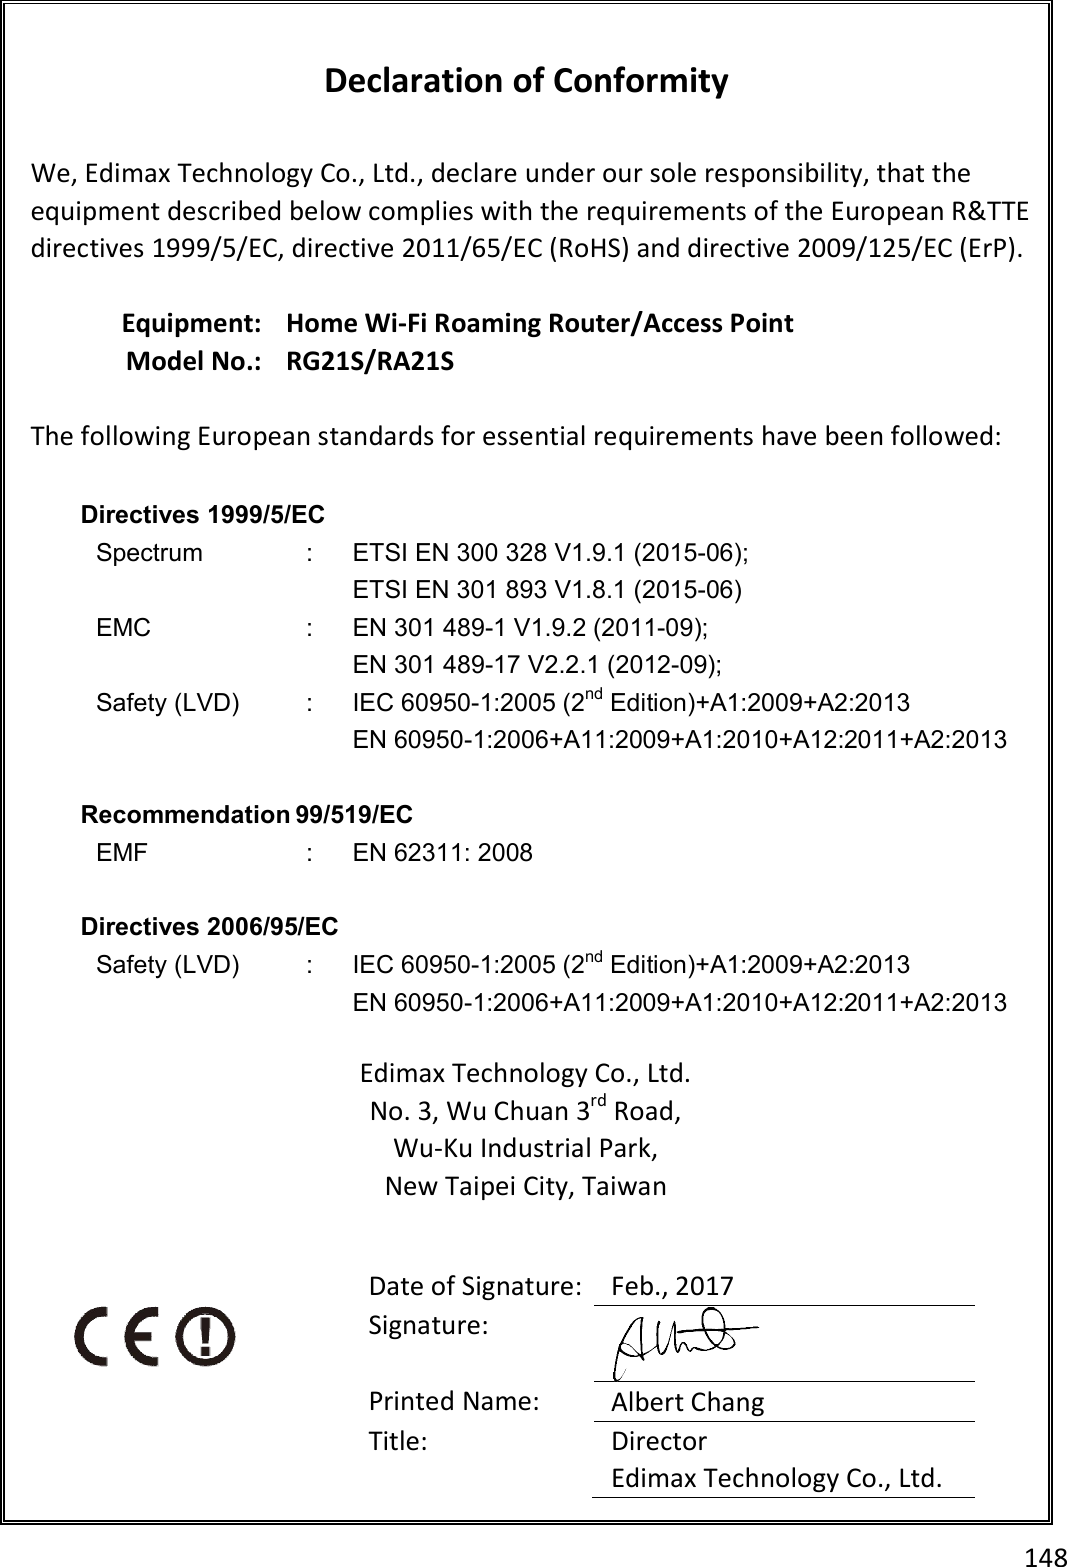 148   Declaration of Conformity  We, Edimax Technology Co., Ltd., declare under our sole responsibility, that the equipment described below complies with the requirements of the European R&amp;TTE directives 1999/5/EC, directive 2011/65/EC (RoHS) and directive 2009/125/EC (ErP).  Equipment: Home Wi-Fi Roaming Router/Access Point Model No.: RG21S/RA21S  The following European standards for essential requirements have been followed:  Directives 1999/5/EC Spectrum  :  ETSI EN 300 328 V1.9.1 (2015-06); ETSI EN 301 893 V1.8.1 (2015-06) EMC  :  EN 301 489-1 V1.9.2 (2011-09); EN 301 489-17 V2.2.1 (2012-09); Safety (LVD)  :  IEC 60950-1:2005 (2nd Edition)+A1:2009+A2:2013 EN 60950-1:2006+A11:2009+A1:2010+A12:2011+A2:2013  Recommendation 99/519/EC EMF  :  EN 62311: 2008  Directives 2006/95/EC   Safety (LVD)  :  IEC 60950-1:2005 (2nd Edition)+A1:2009+A2:2013 EN 60950-1:2006+A11:2009+A1:2010+A12:2011+A2:2013  Edimax Technology Co., Ltd. No. 3, Wu Chuan 3rd Road, Wu-Ku Industrial Park, New Taipei City, Taiwan    Date of Signature: Feb., 2017 Signature:  Printed Name:  Albert Chang Title:  Director Edimax Technology Co., Ltd.  